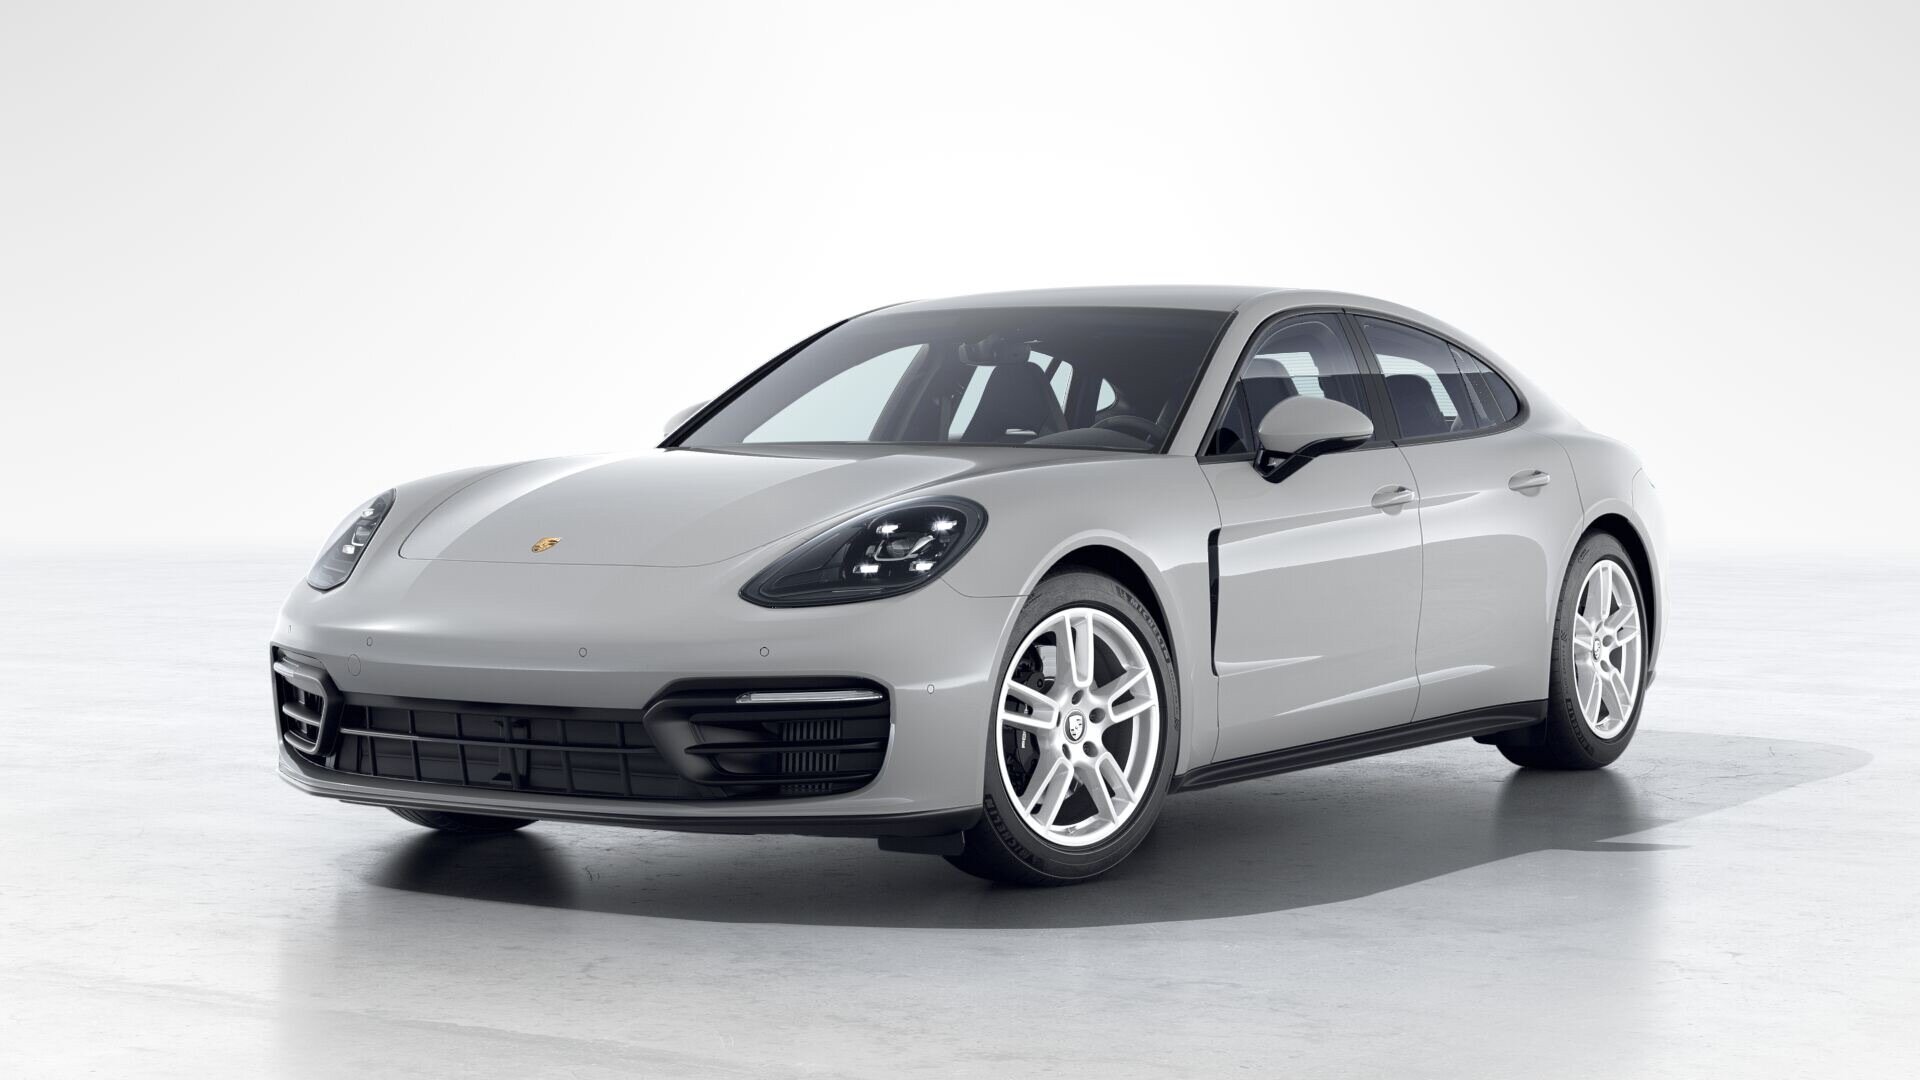 Porsche Panamera for sale in Fort Myers, FL